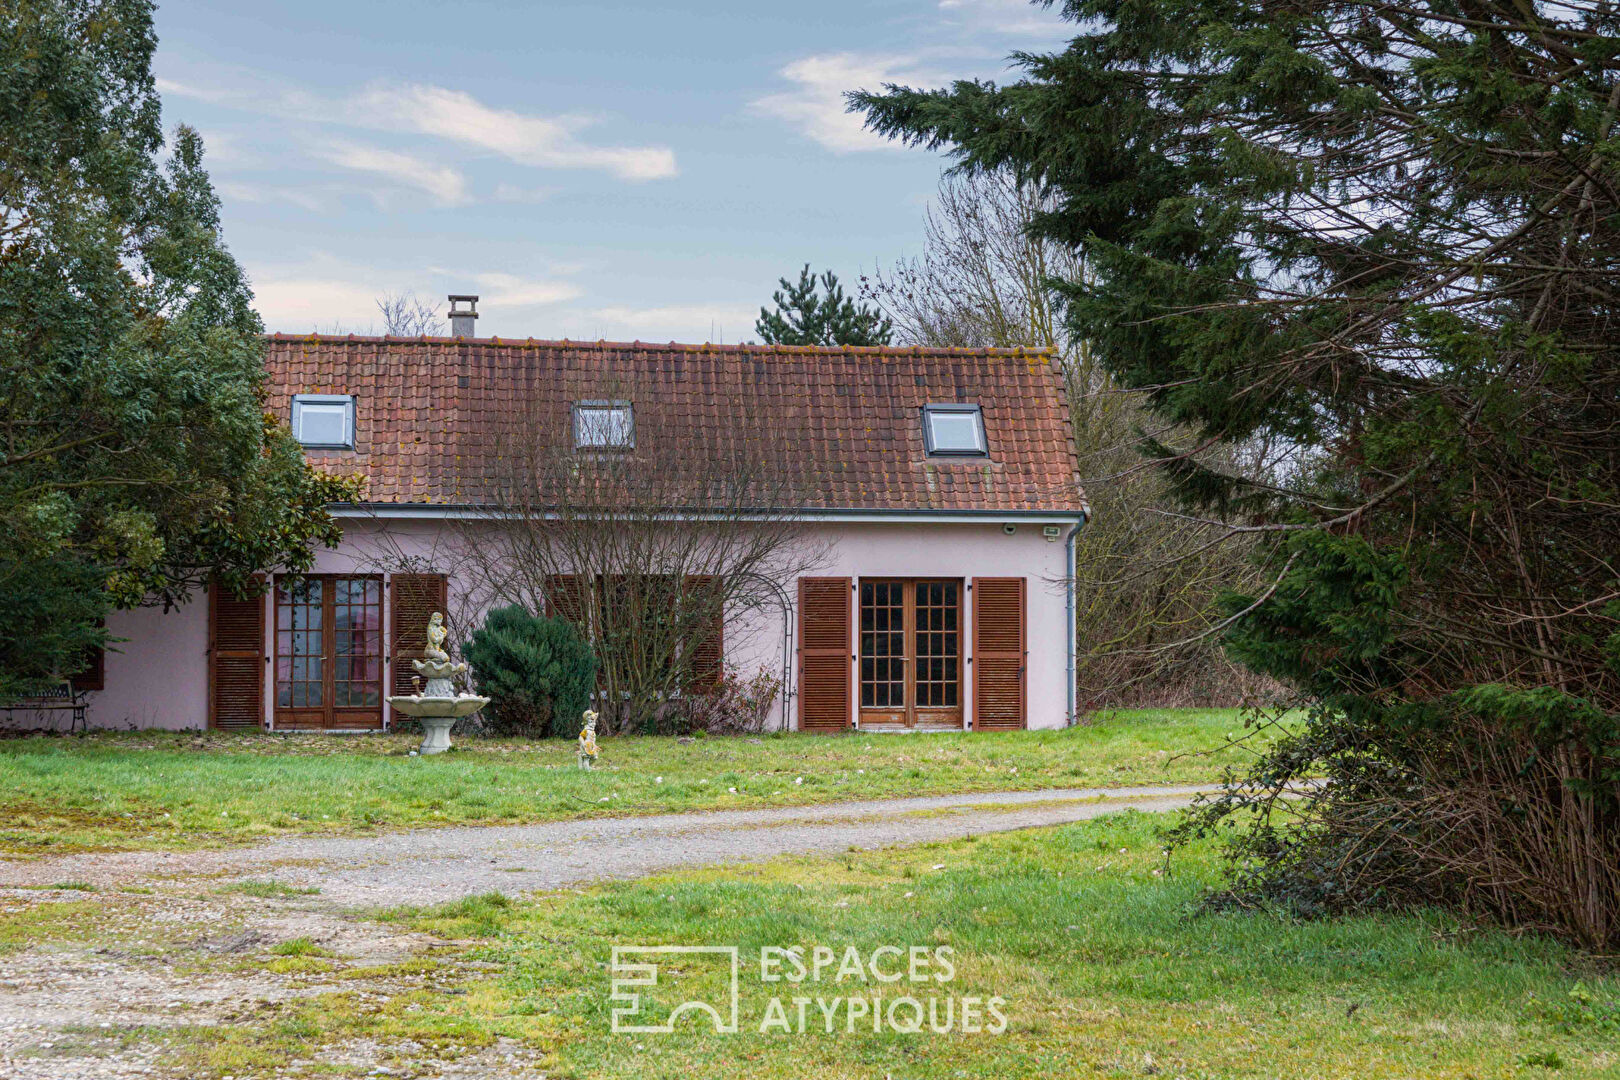 Farmhouse to rehabilitate at the entrance to the Baie de Somme – Rue